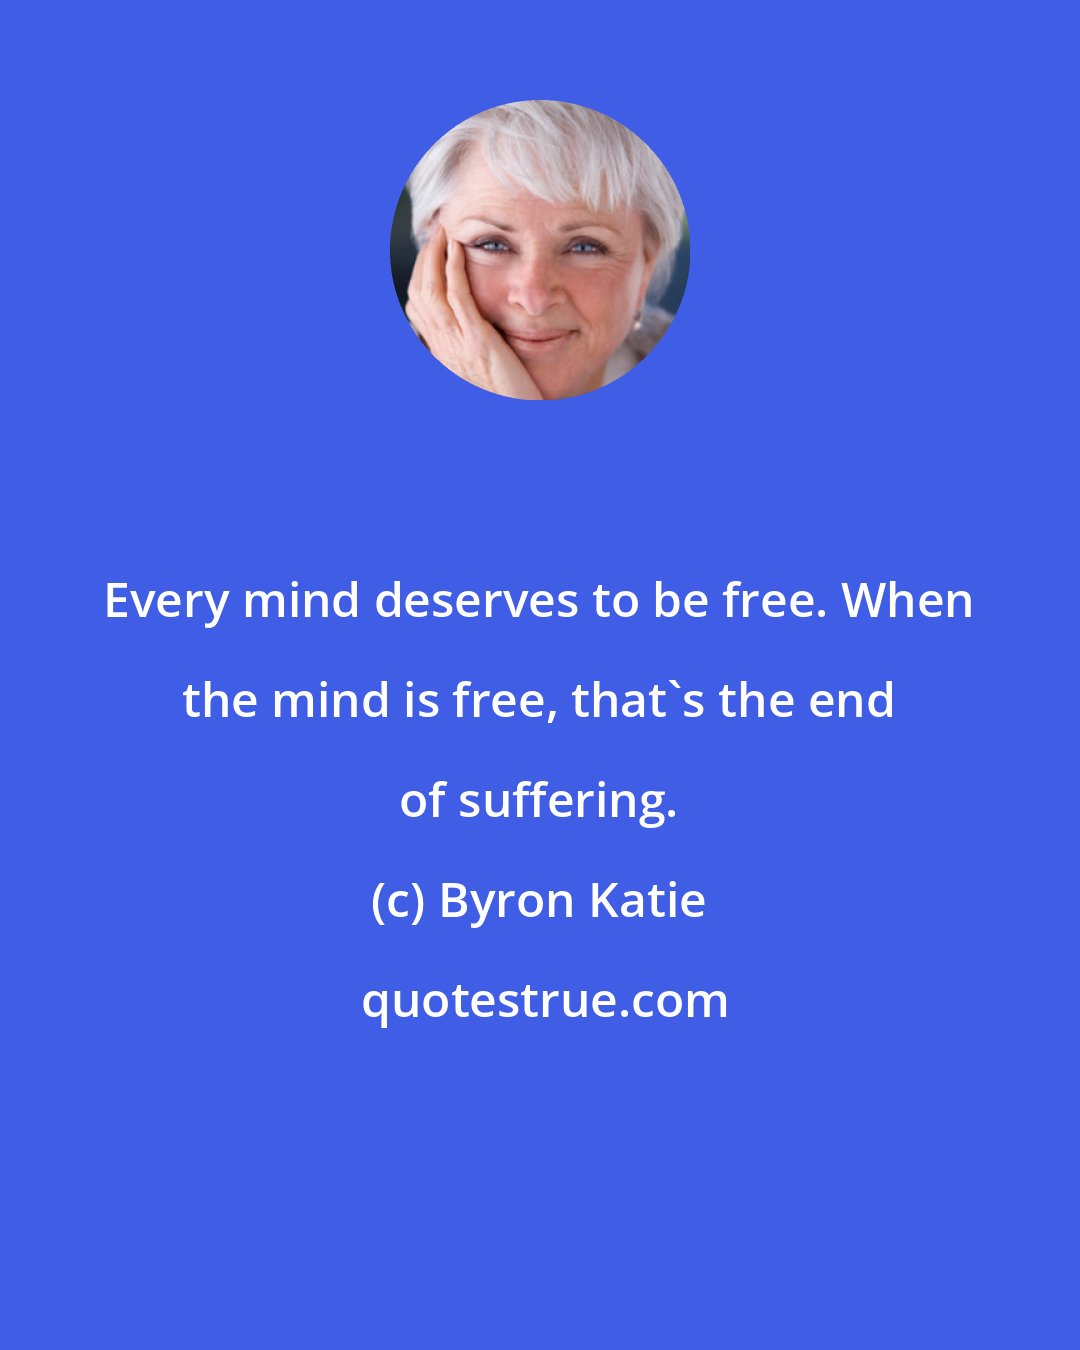 Byron Katie: Every mind deserves to be free. When the mind is free, that's the end of suffering.